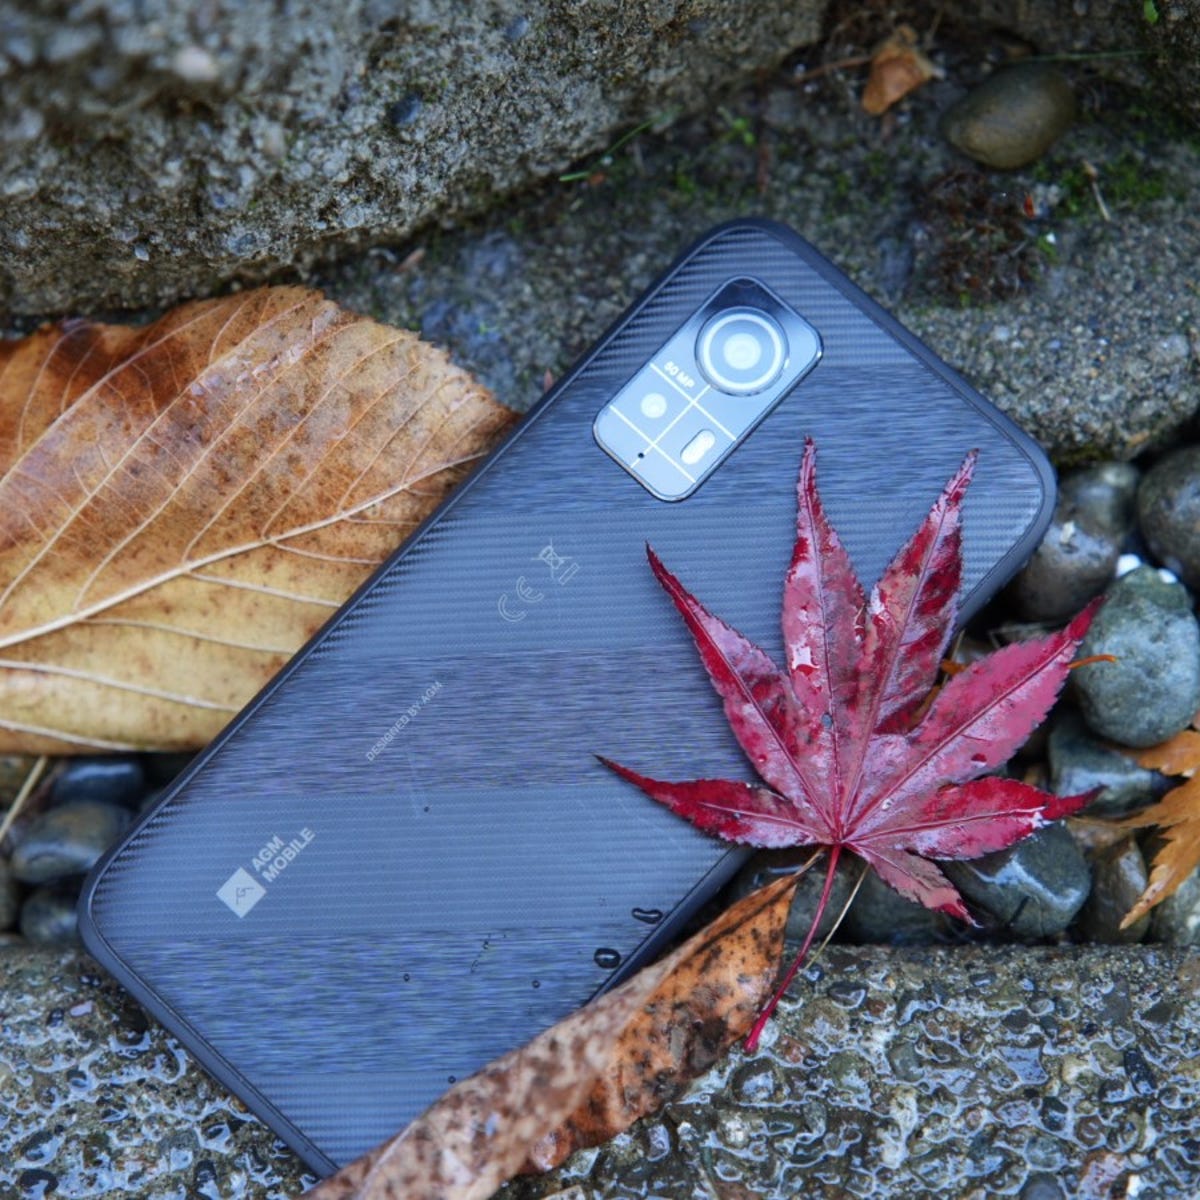 Finally, a rugged Android phone that doesn't look and feel like a